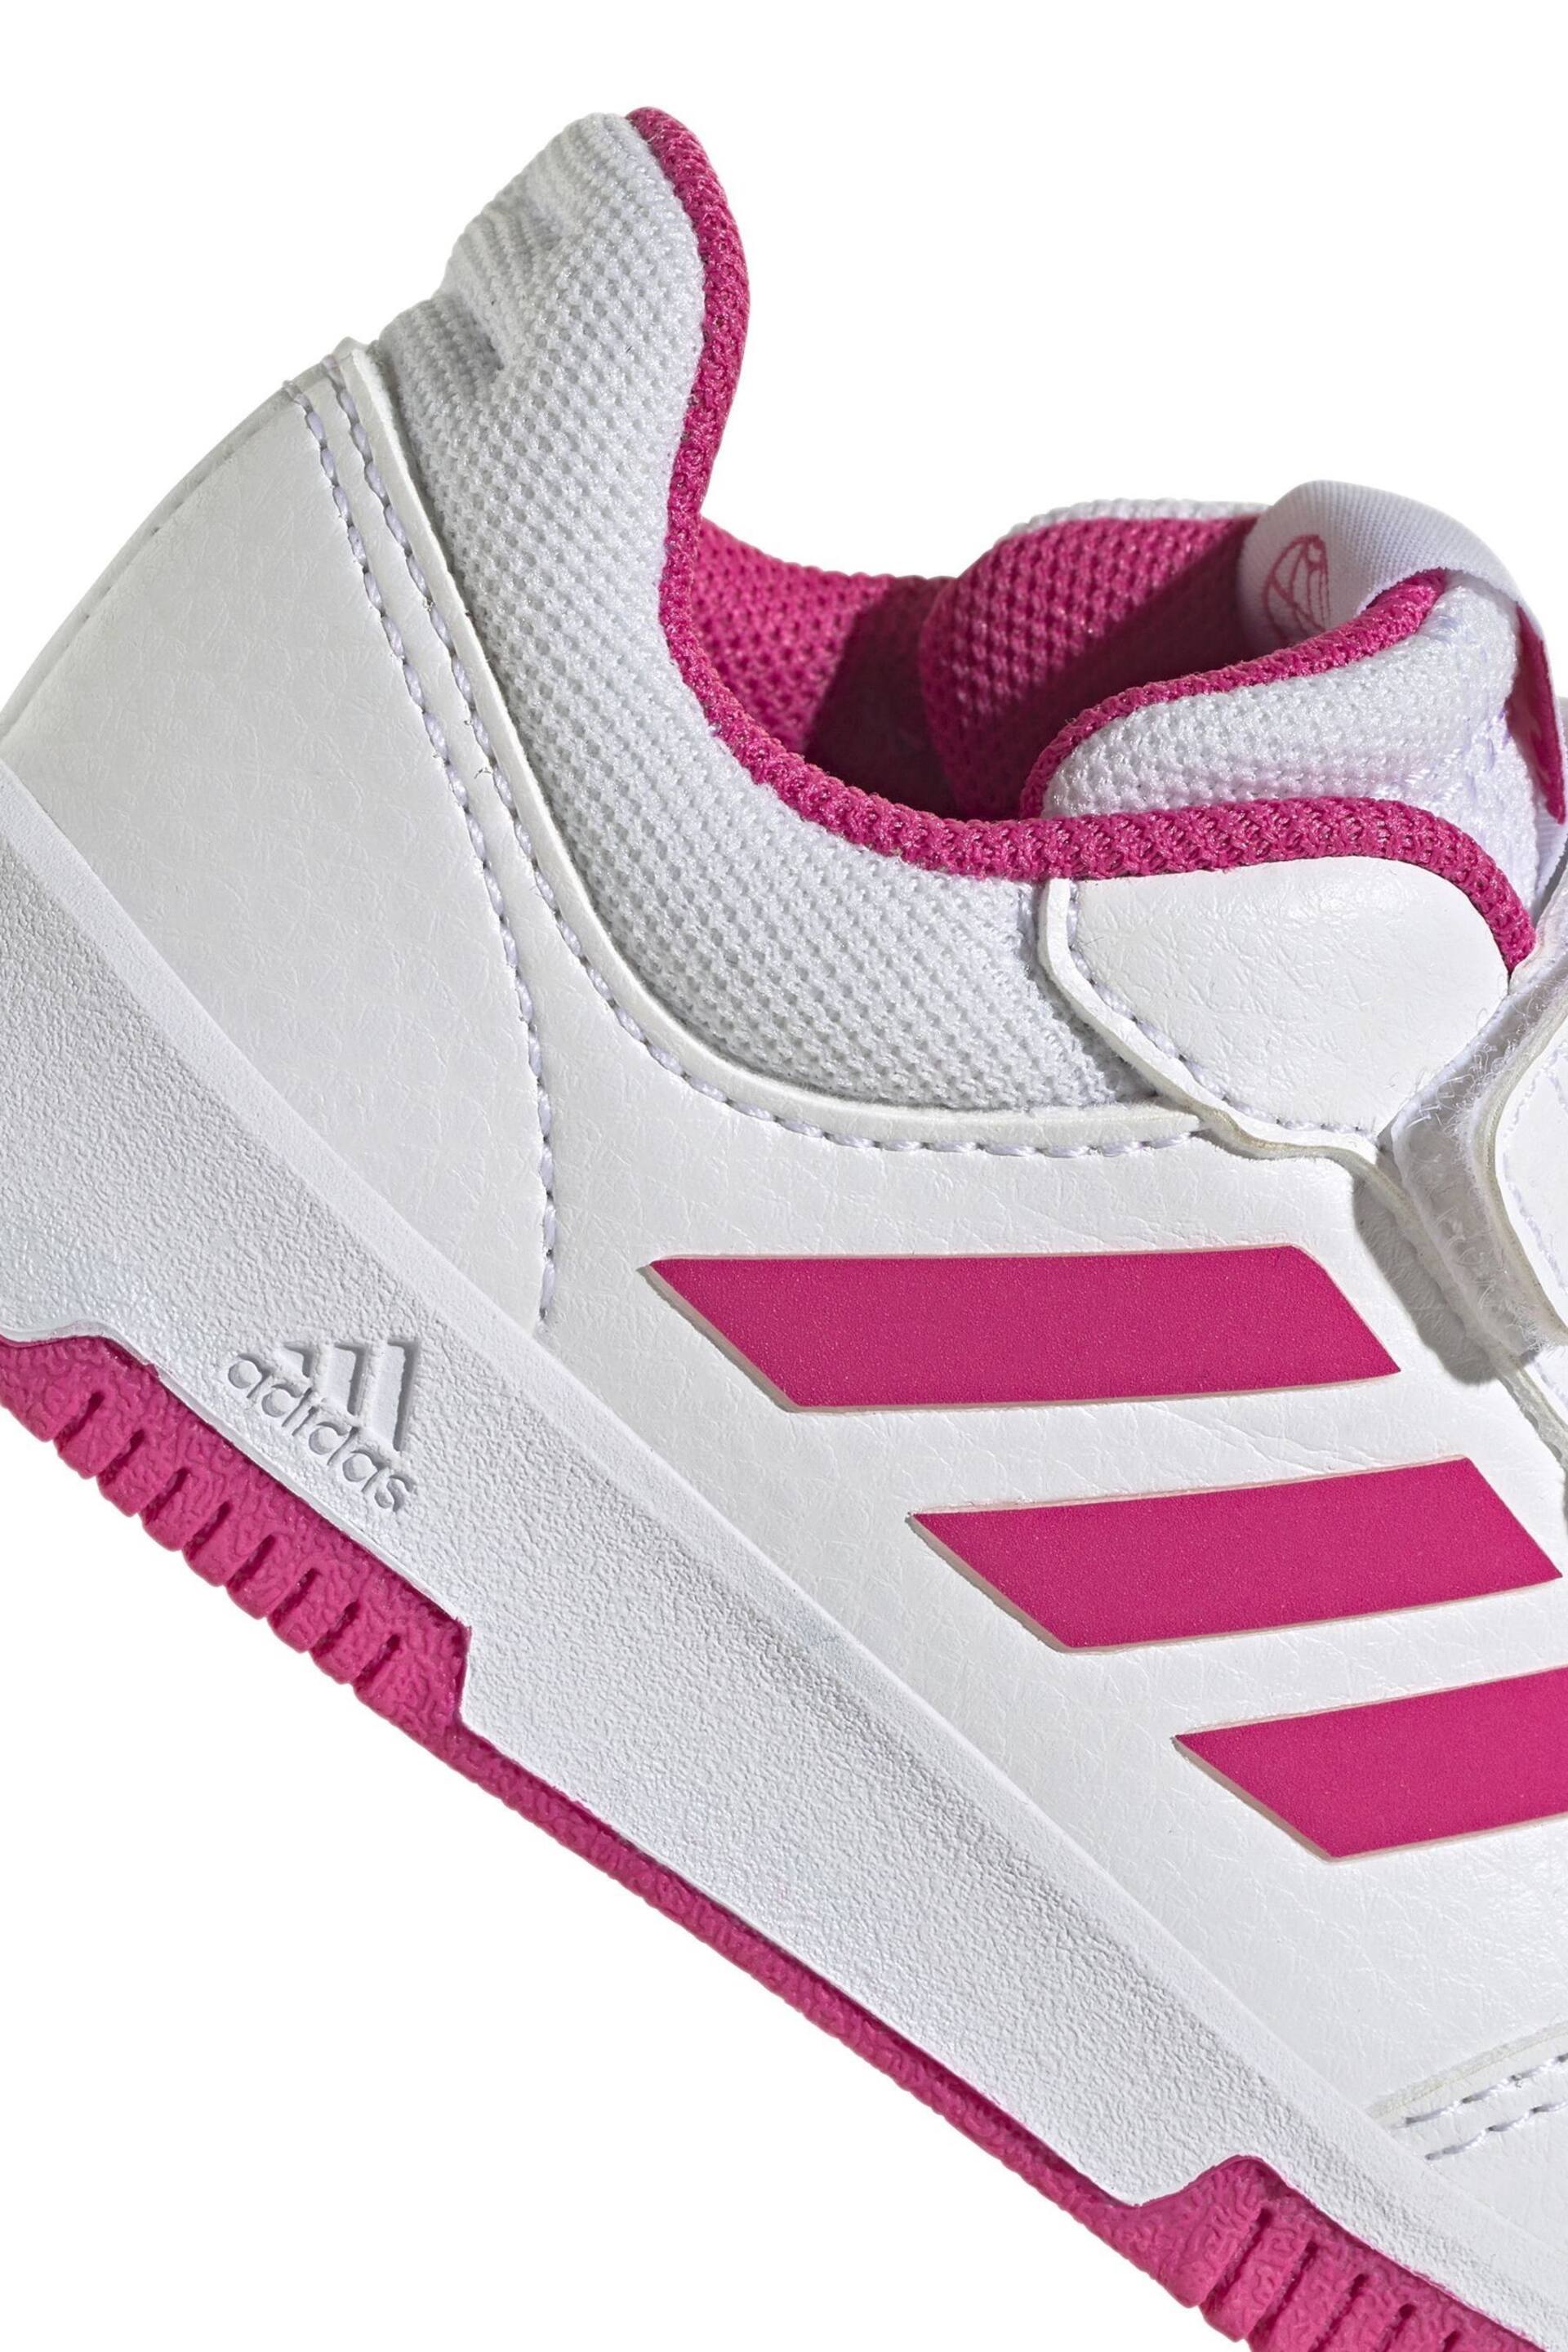 adidas White/Pink Tensaur Hook and Loop Shoes - Image 8 of 9